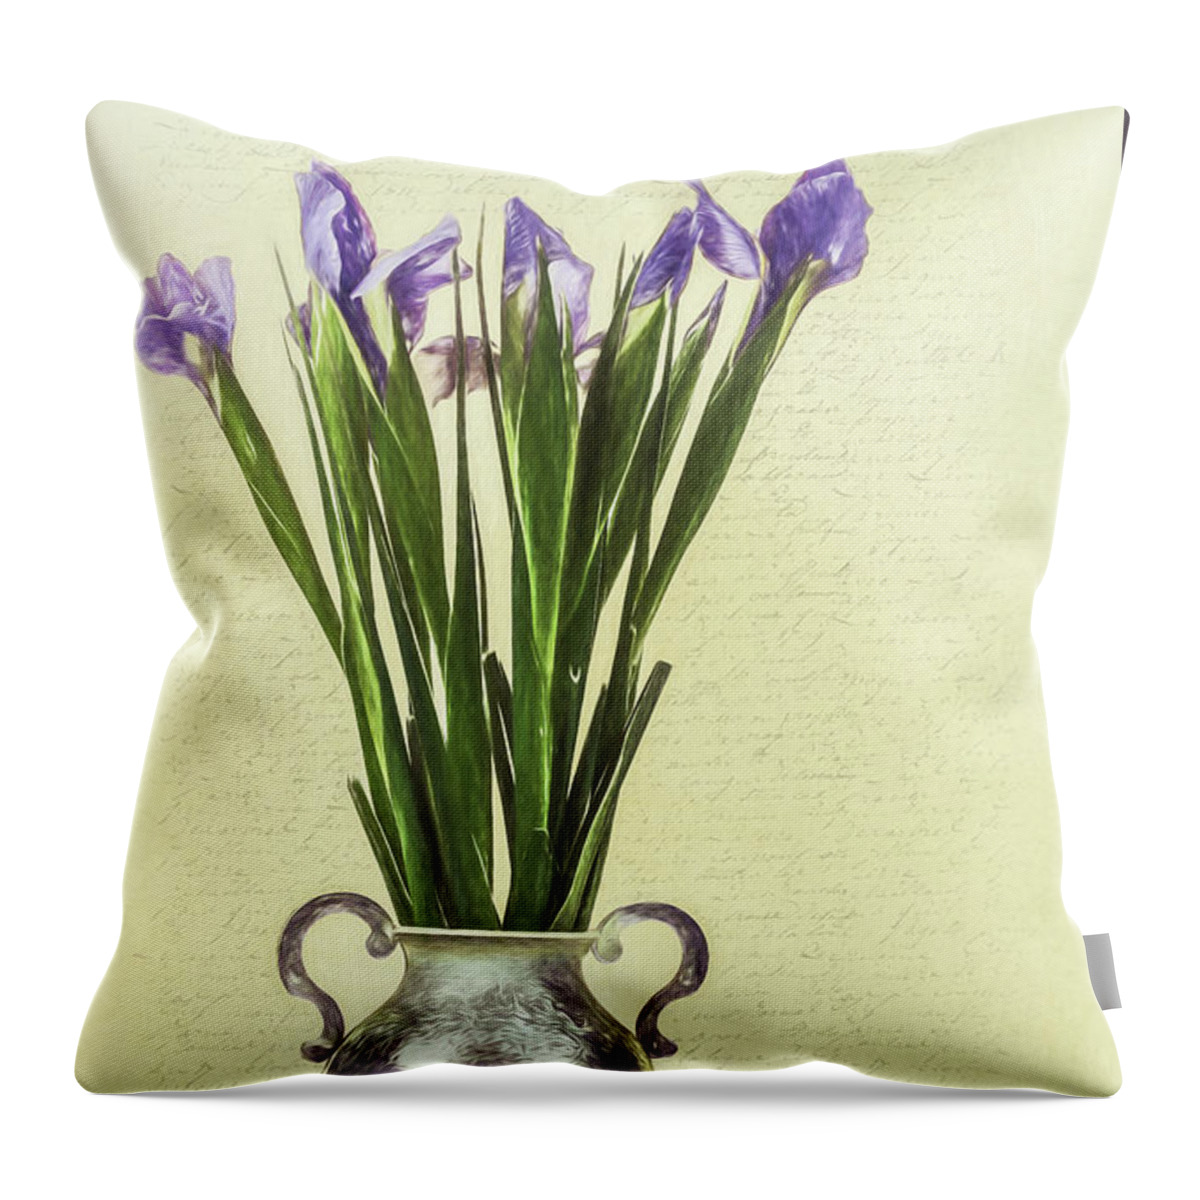 Letter Throw Pillow featuring the photograph Forgotten Letter by Jennifer Grossnickle